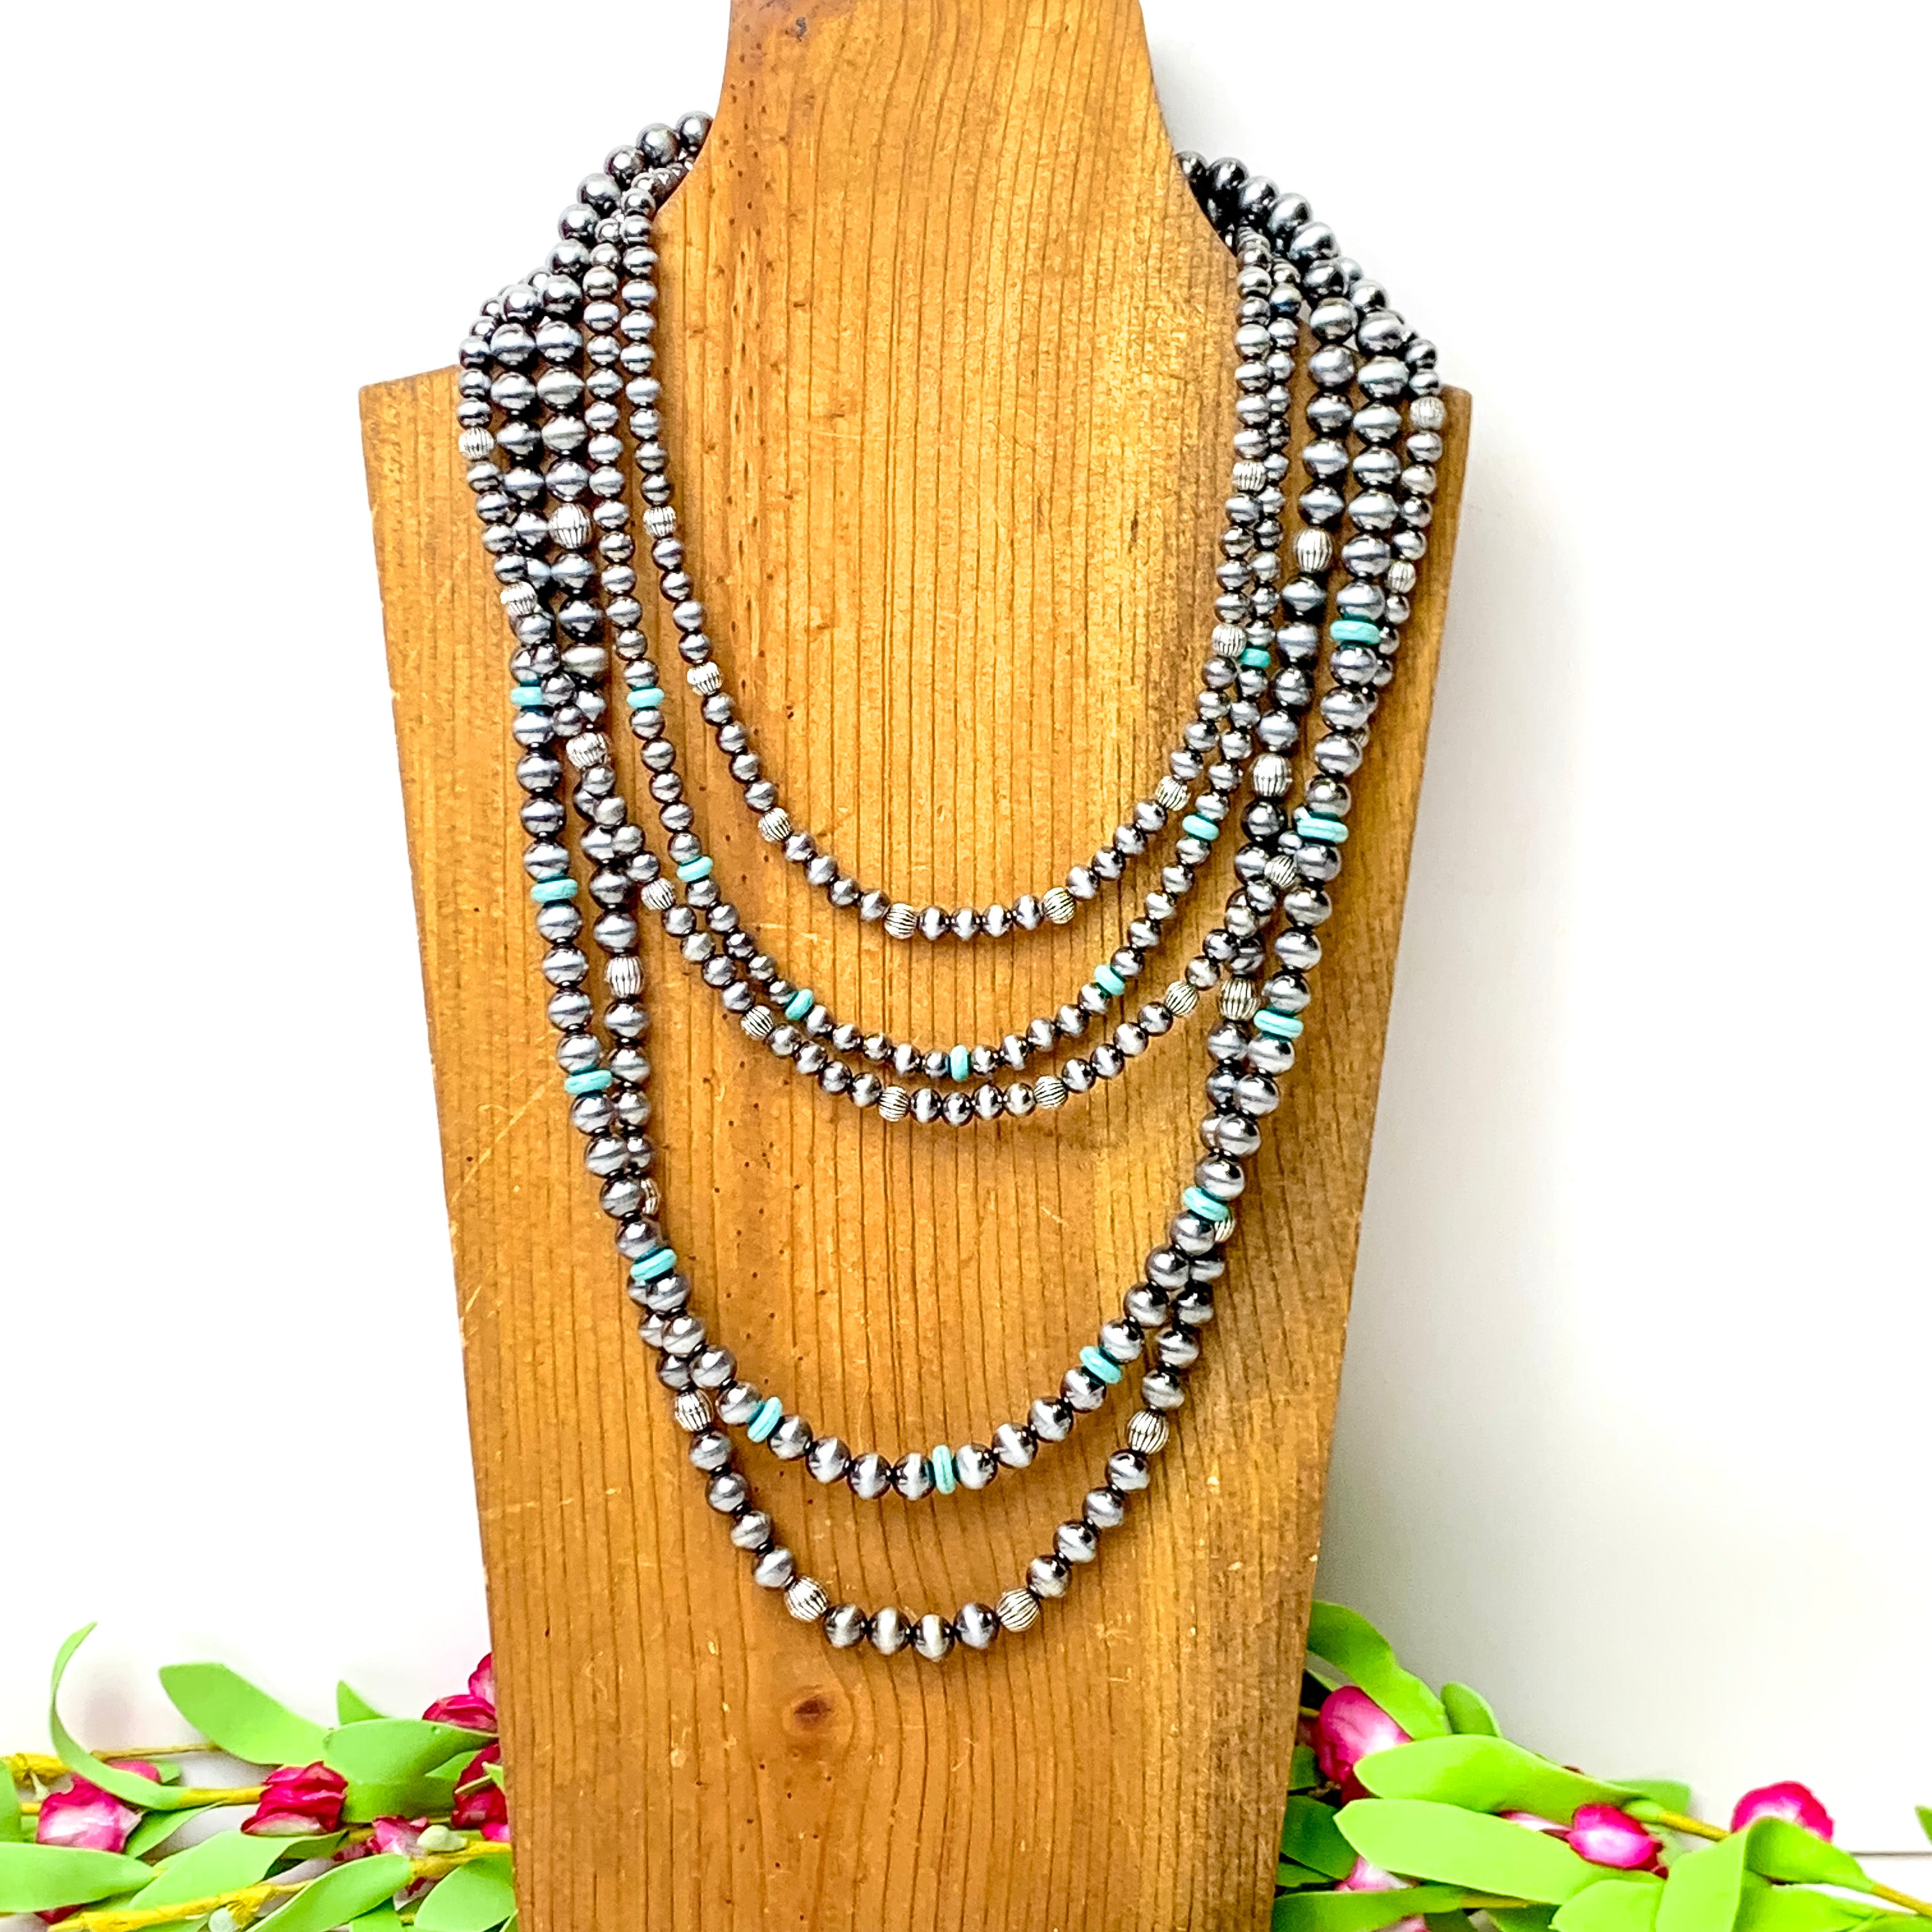 Five Row Faux Navajo Pearl Layered Necklace with Faux Turquoise Disk Bead Spacers in Silver Tone - Giddy Up Glamour Boutique